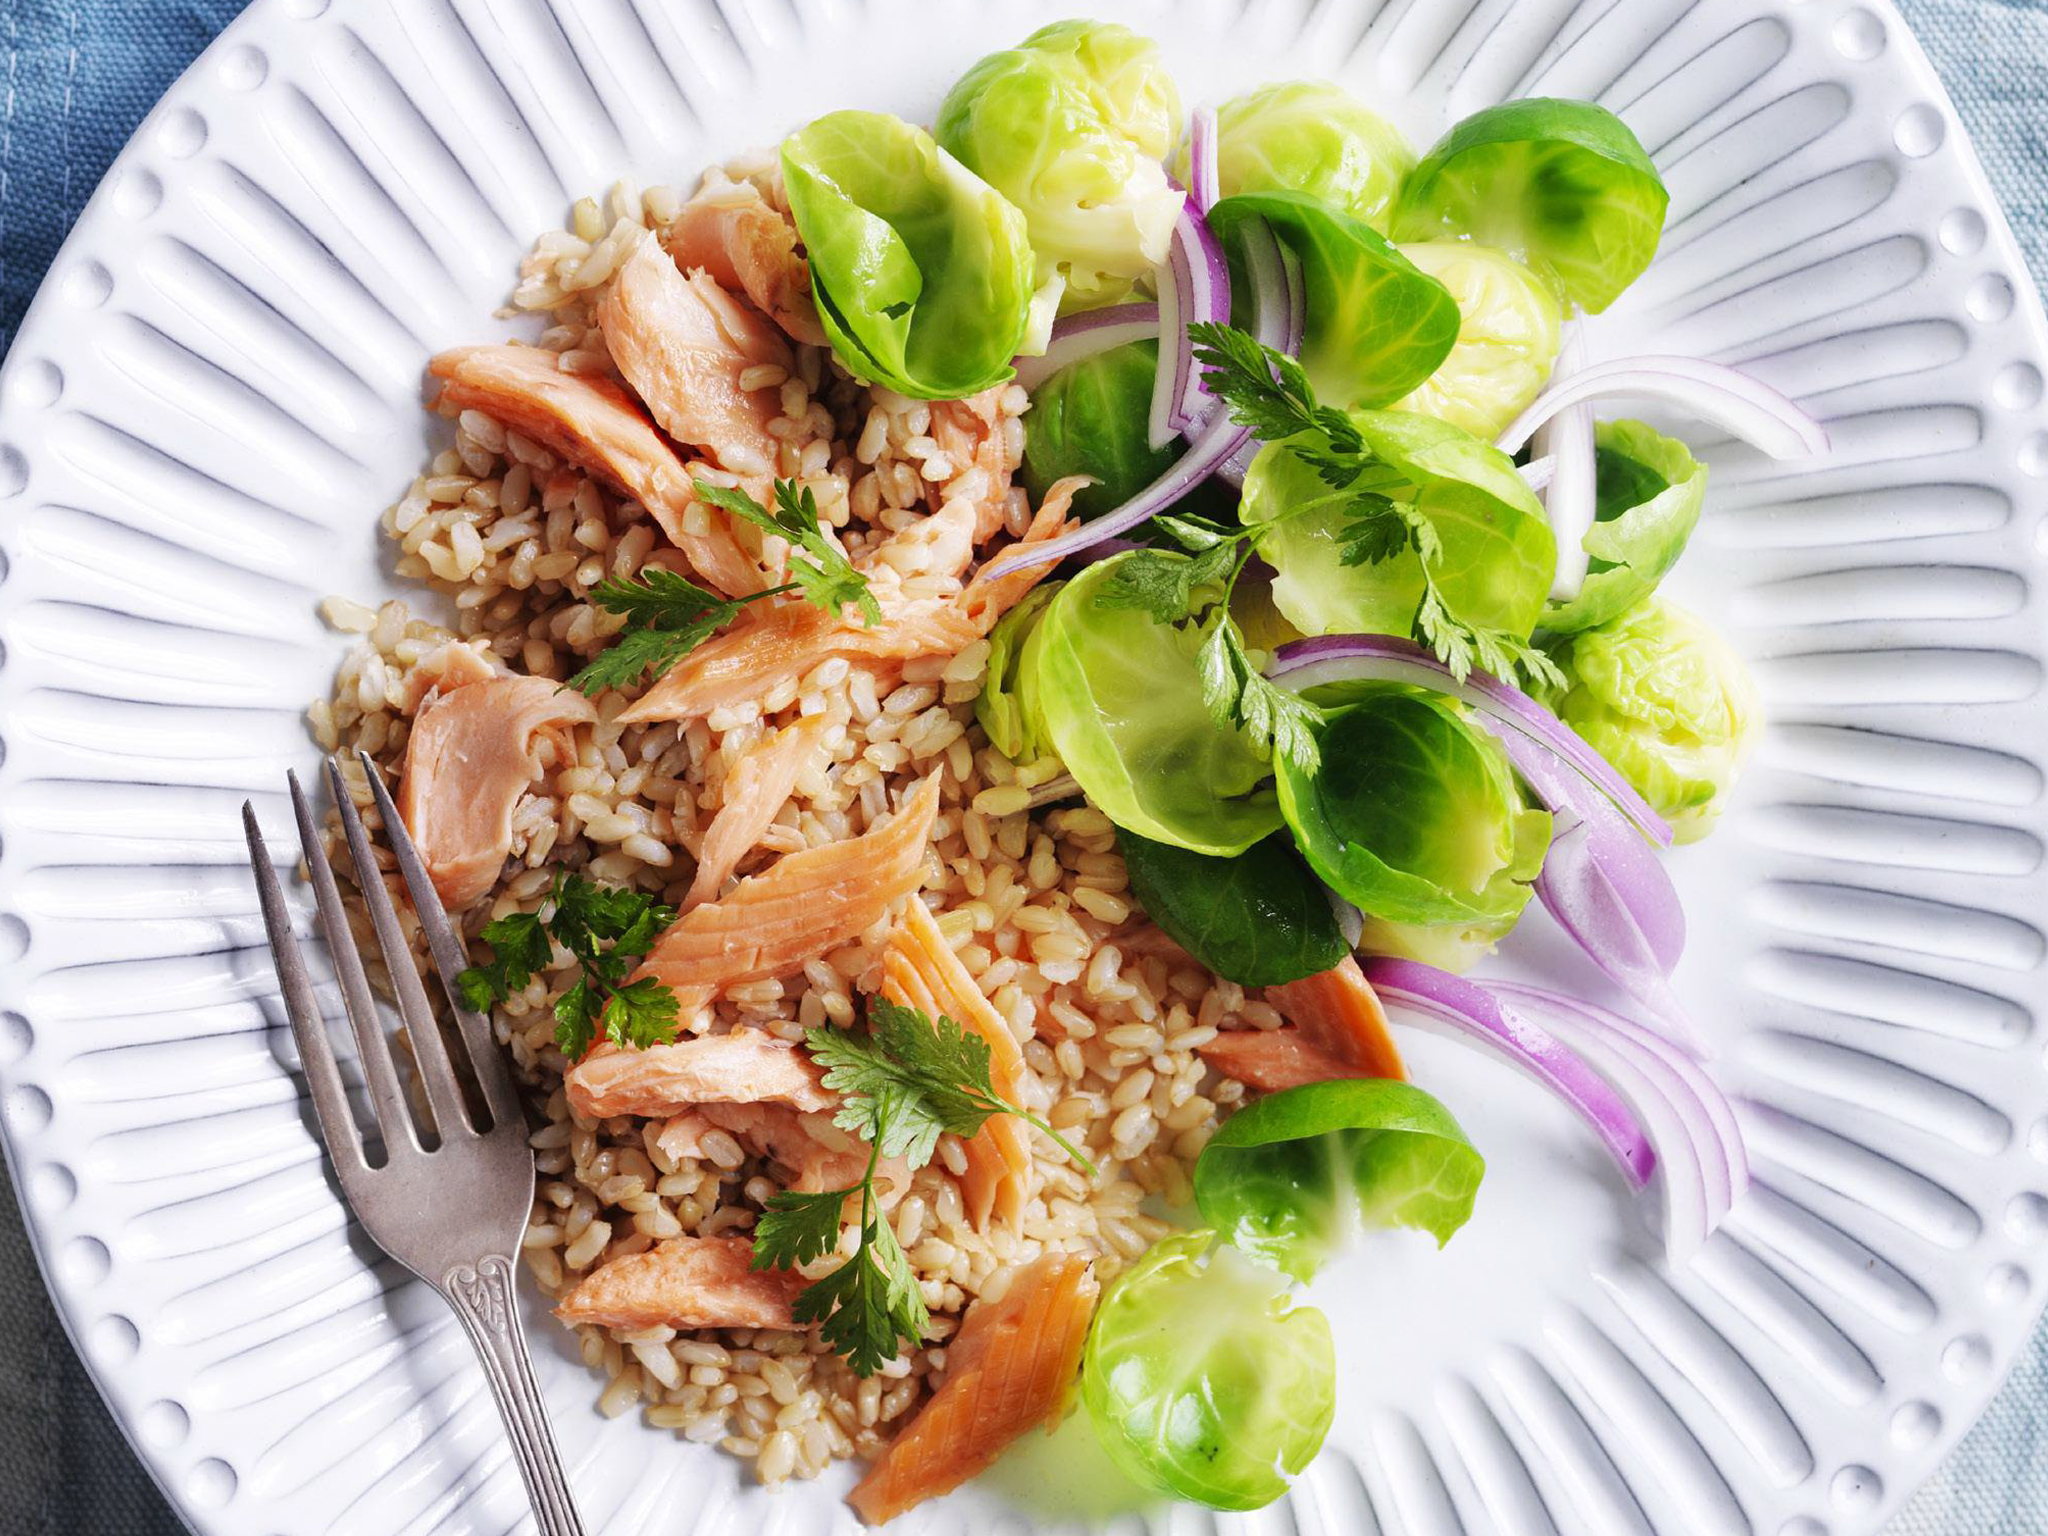 SMOKEDTROUT AND BROWN RICE SALAD